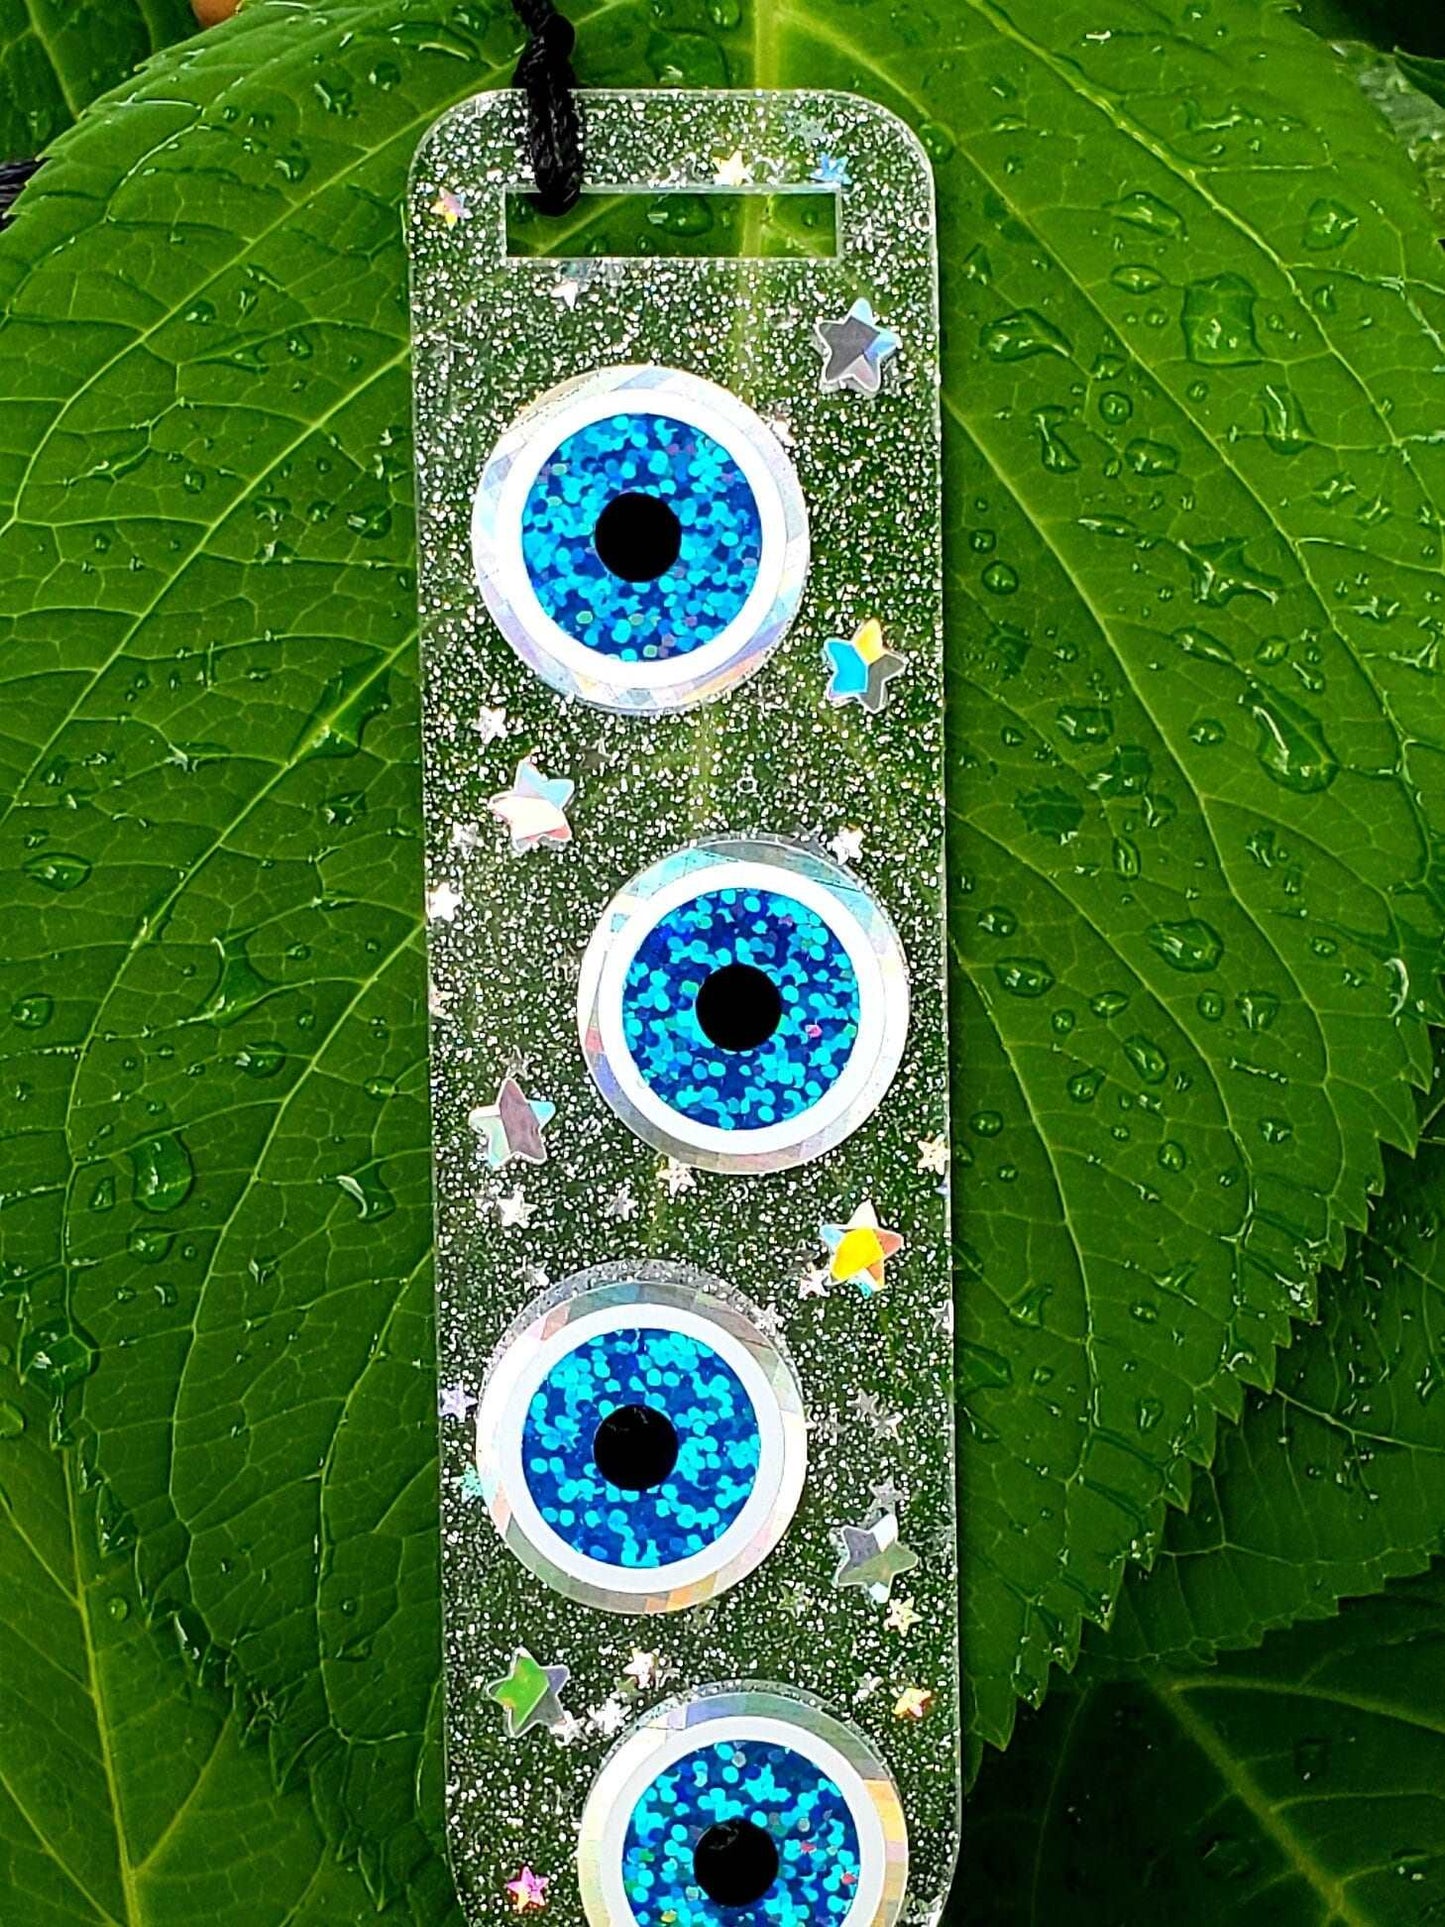 Evil Eye Bookmark with sparkly blue eyes, good luck talisman, ward off bad vibes, acrylic bookmark with tassel, small gift for readers